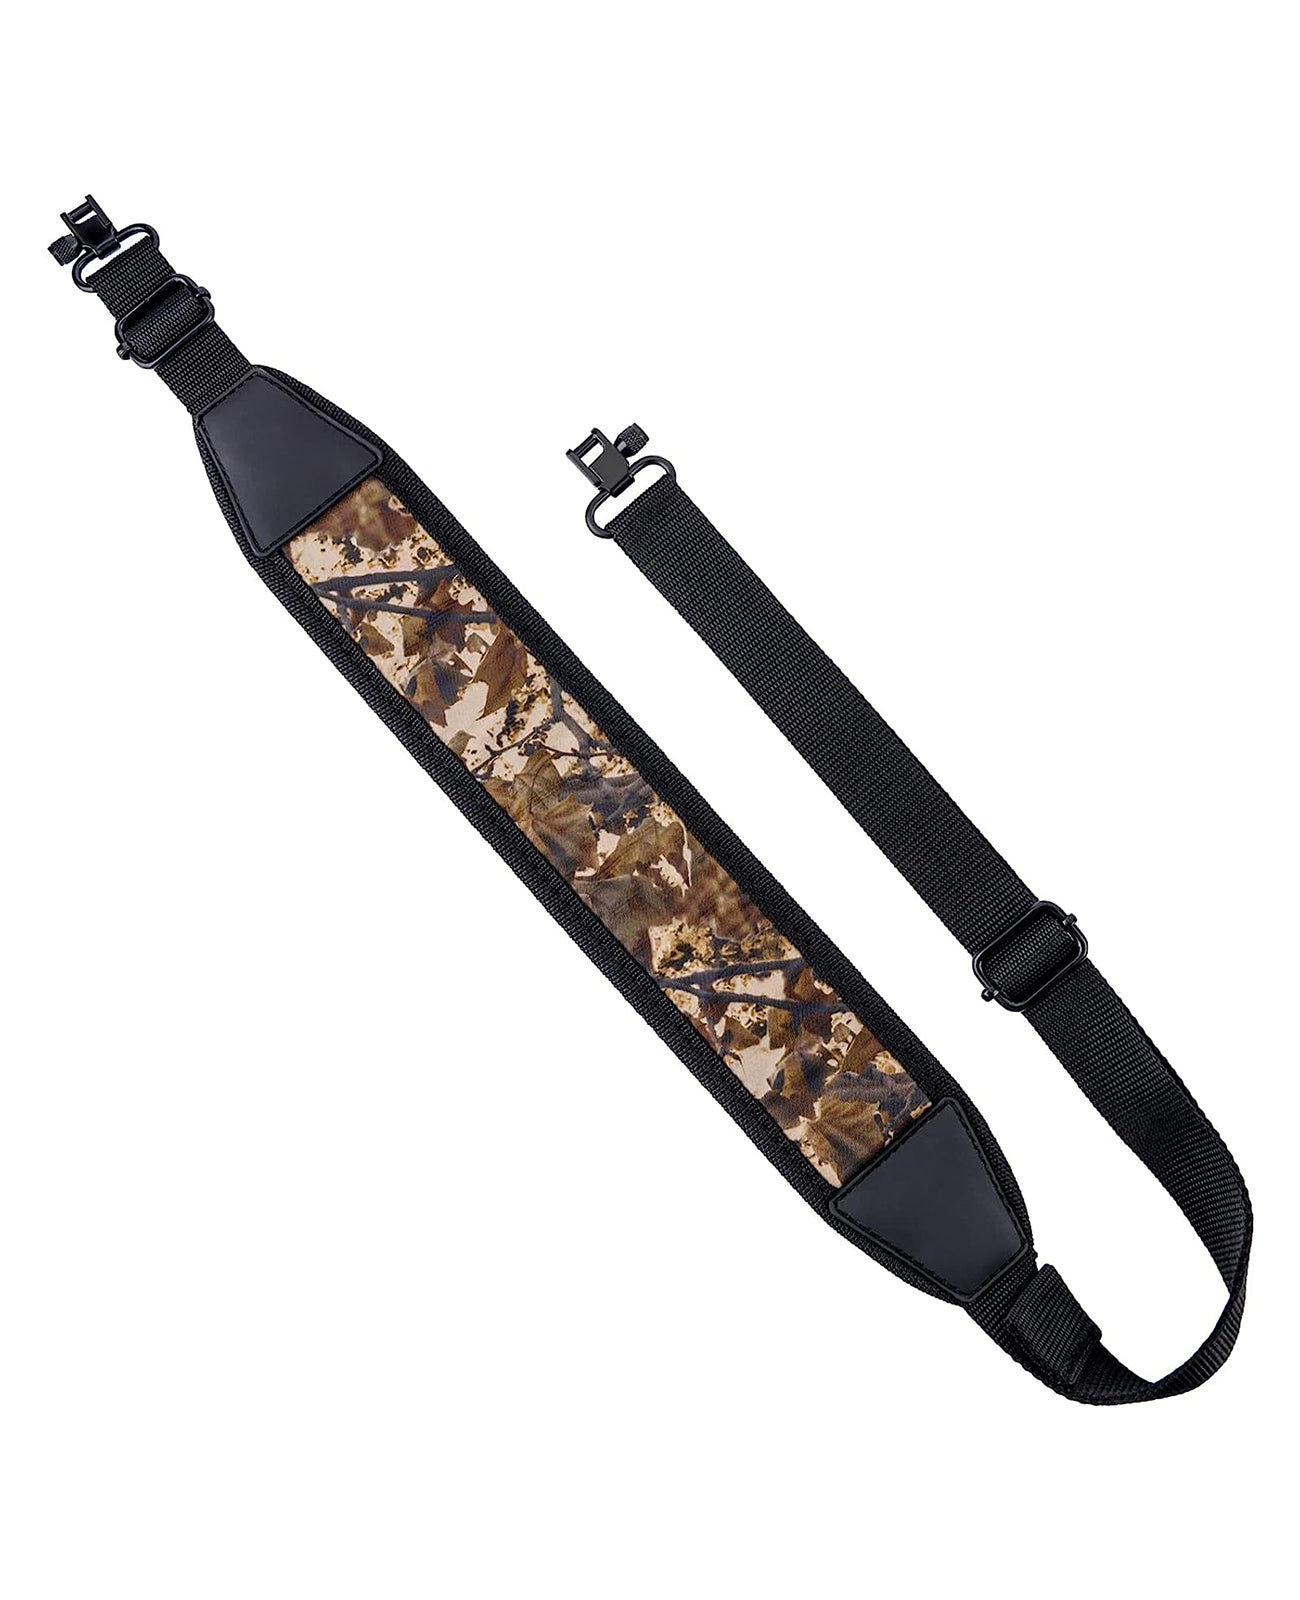  Knox Tactical Gun Sling, 2 Point Quick Adjust Sling,  Comfortable and Elastic Strap, Perfect Law Enforcement and Hunting Gun  Slings with Two Removable Clips. : Sports & Outdoors